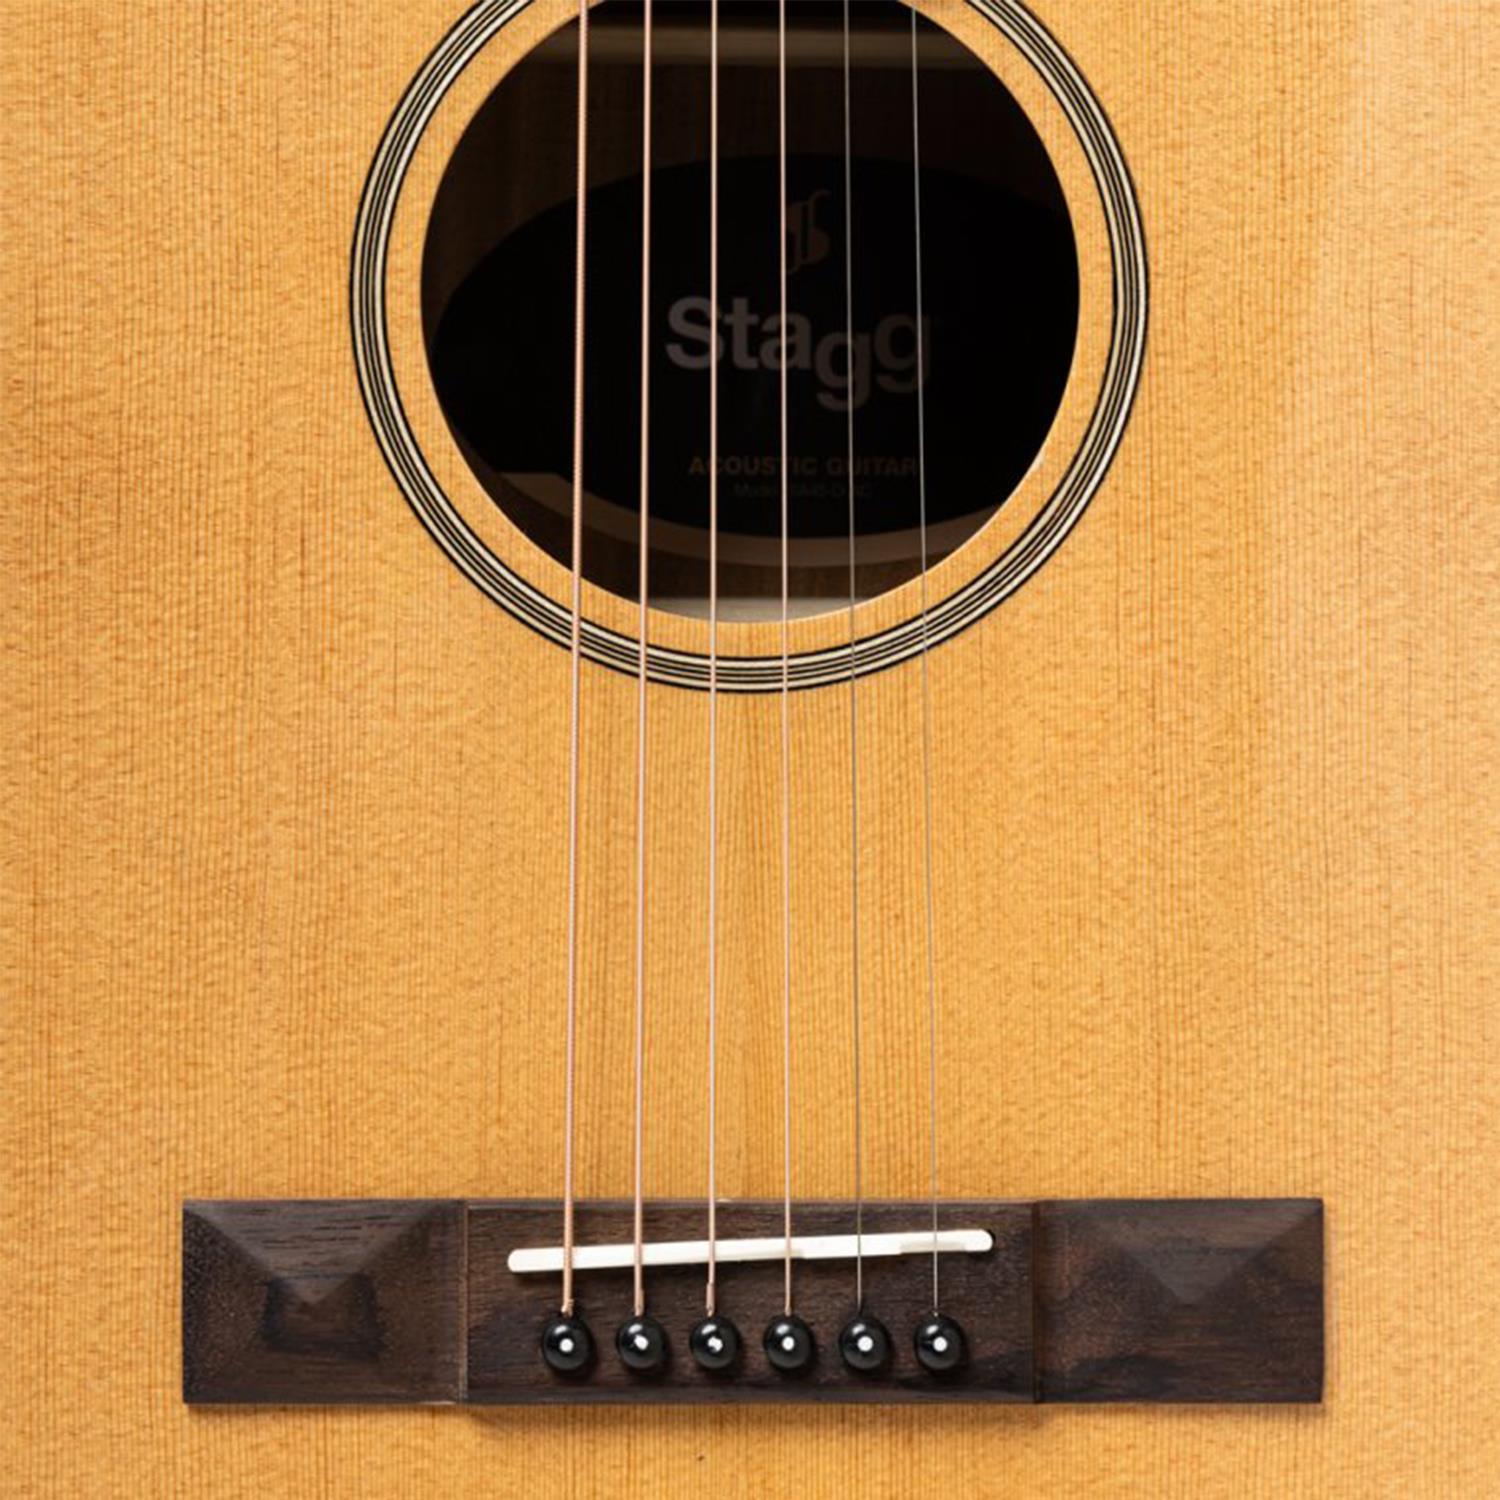 Stagg SA45 O-AC Series 45 Natural Orchestral Acoustic Guitar with Spruce Top - DY Pro Audio